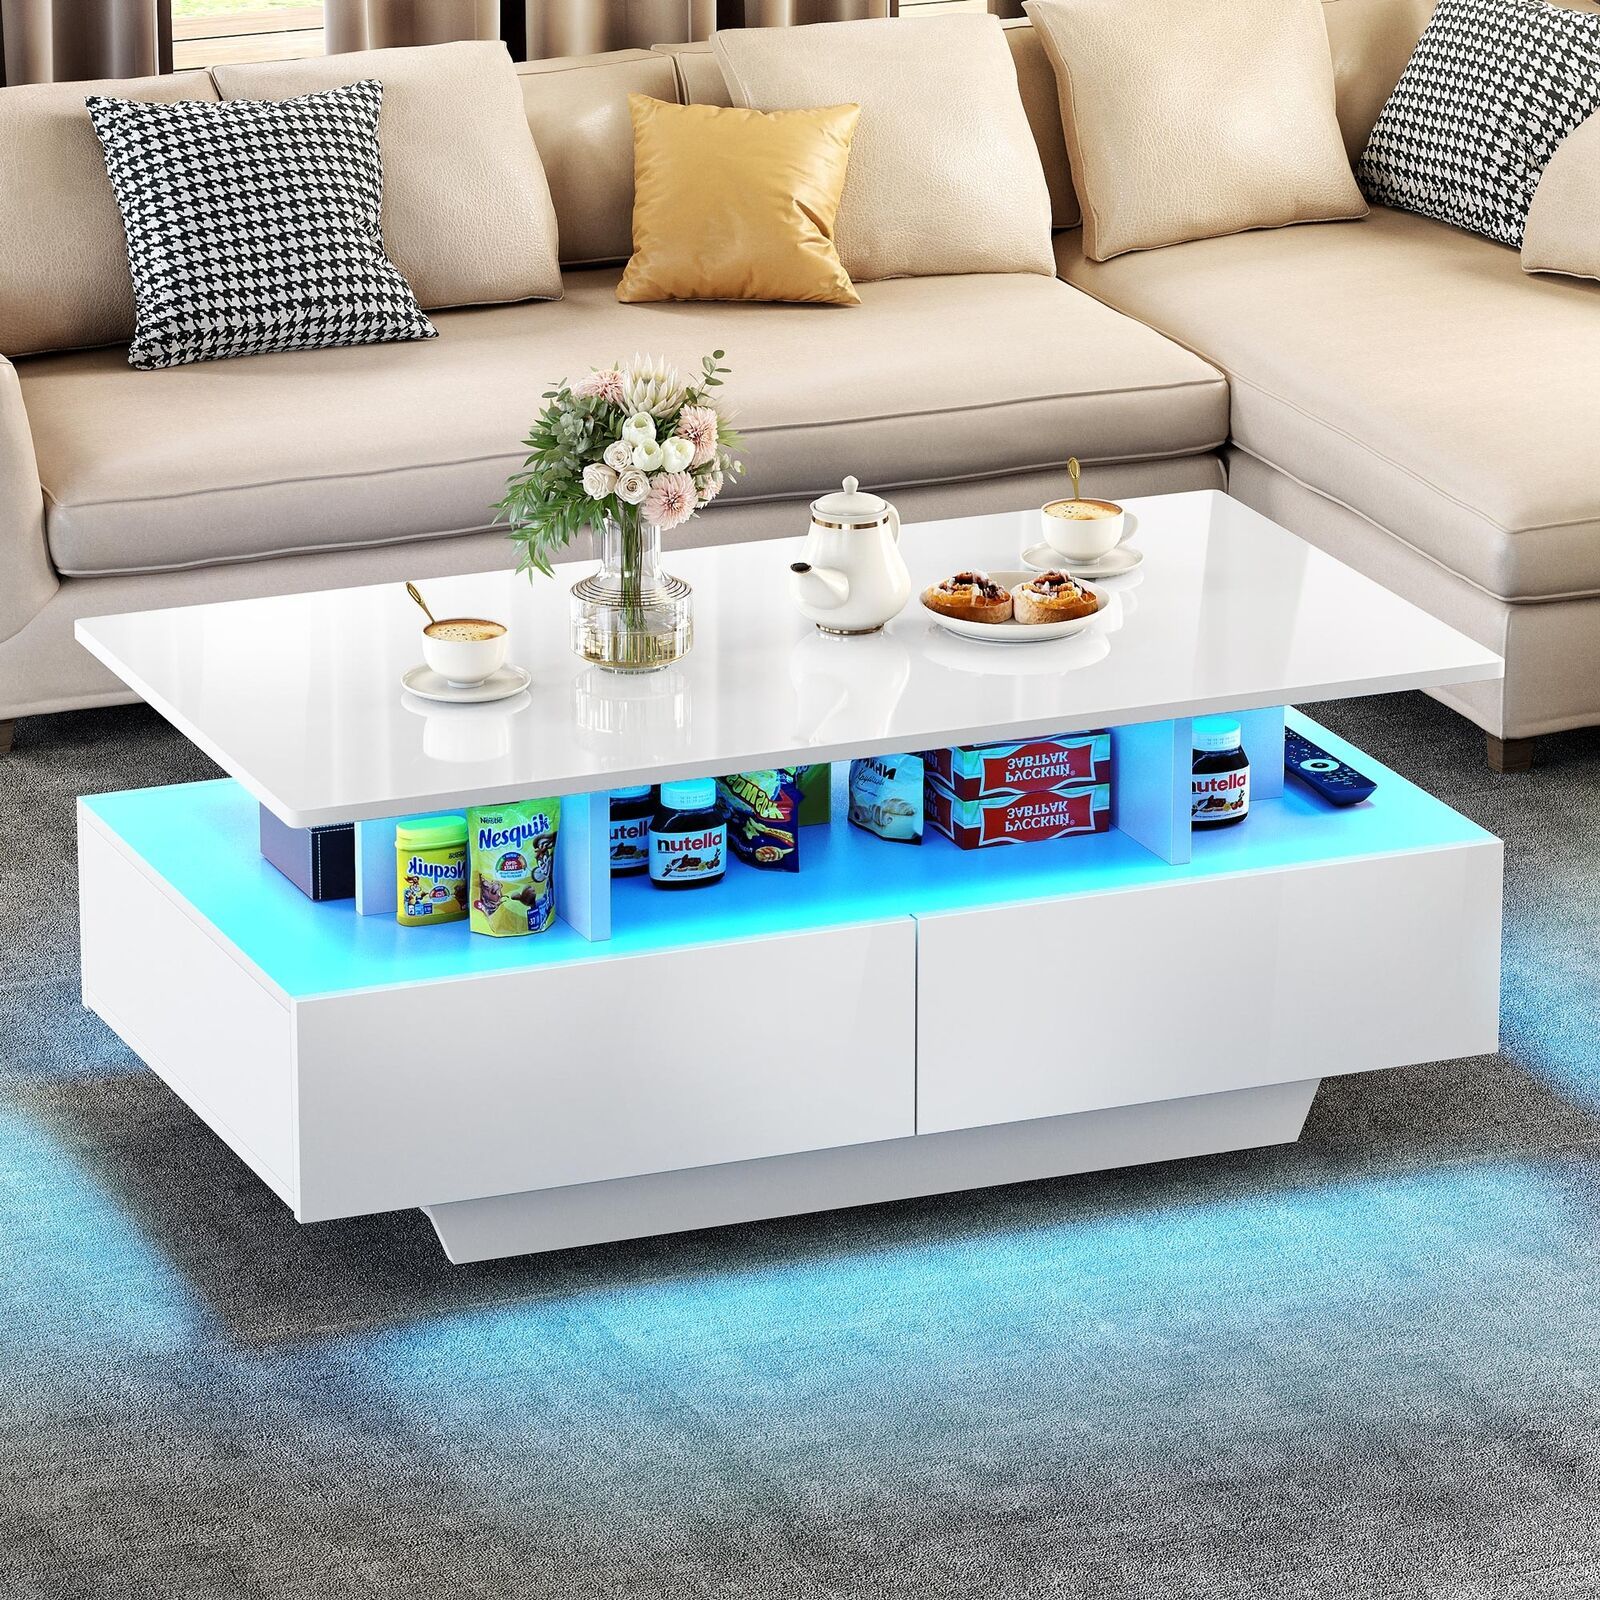 High Gloss Coffee Table Center Cocktail Table With Led Lights & Sliding  Drawers | Ebay In Coffee Tables With Drawers And Led Lights (View 2 of 15)